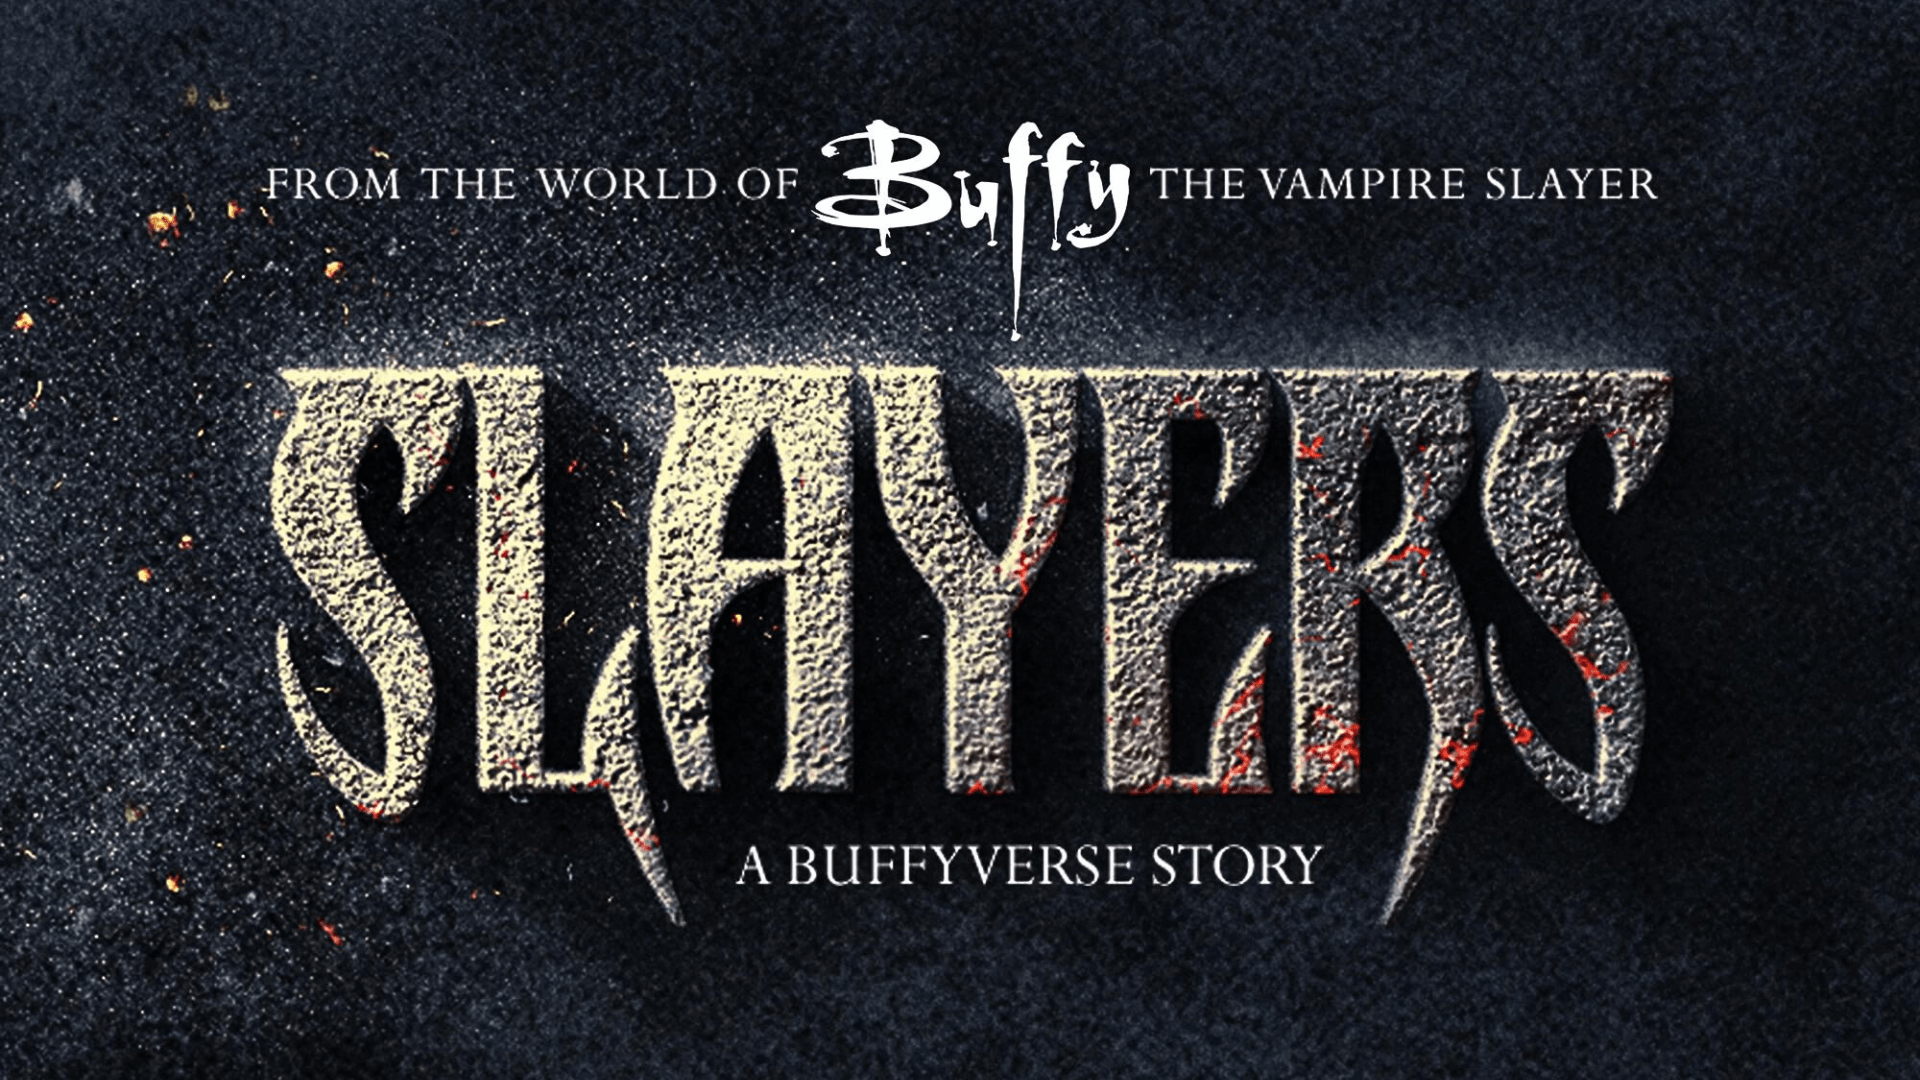 Slayers: A Buffyverse Story - Buffy Reboot Slayers: Everything You Need To Know About Audible’s Buffy The Vampire Slayer Drama